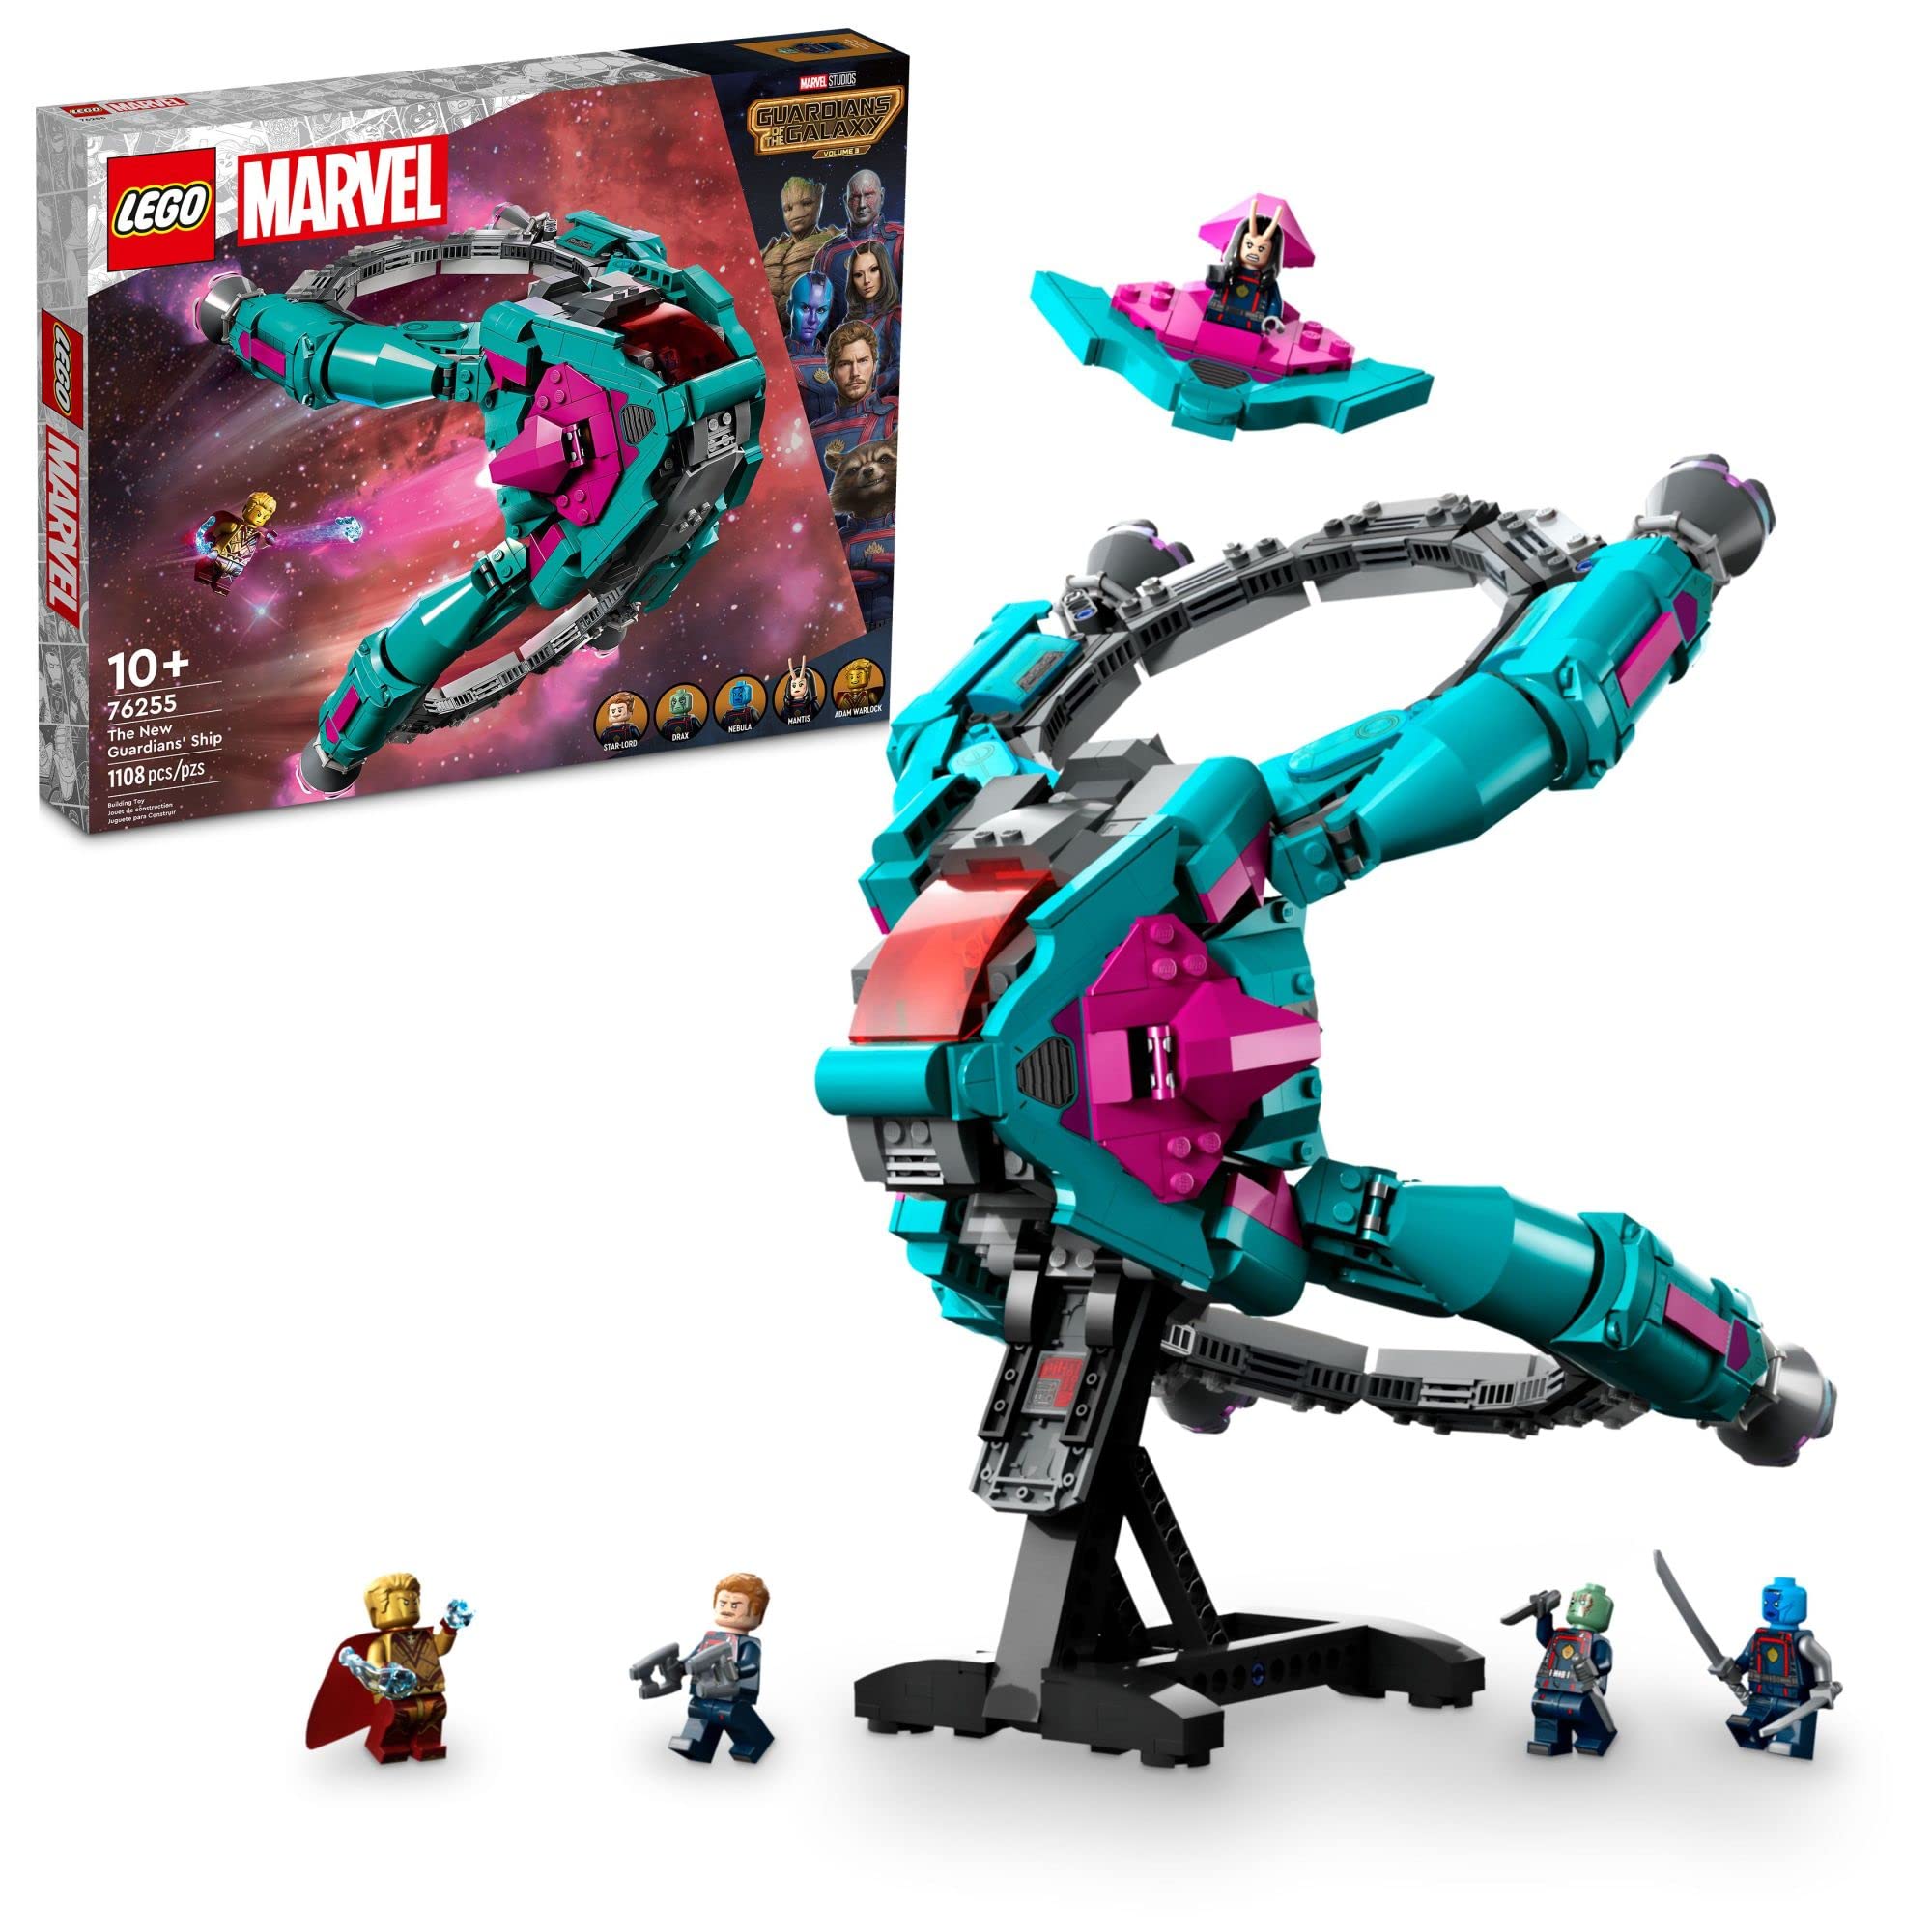 LEGO Marvel The New Guardians’ Ship Spaceship Building Toy w/ 5 Minifigures (76255) $80 + Free Shipping